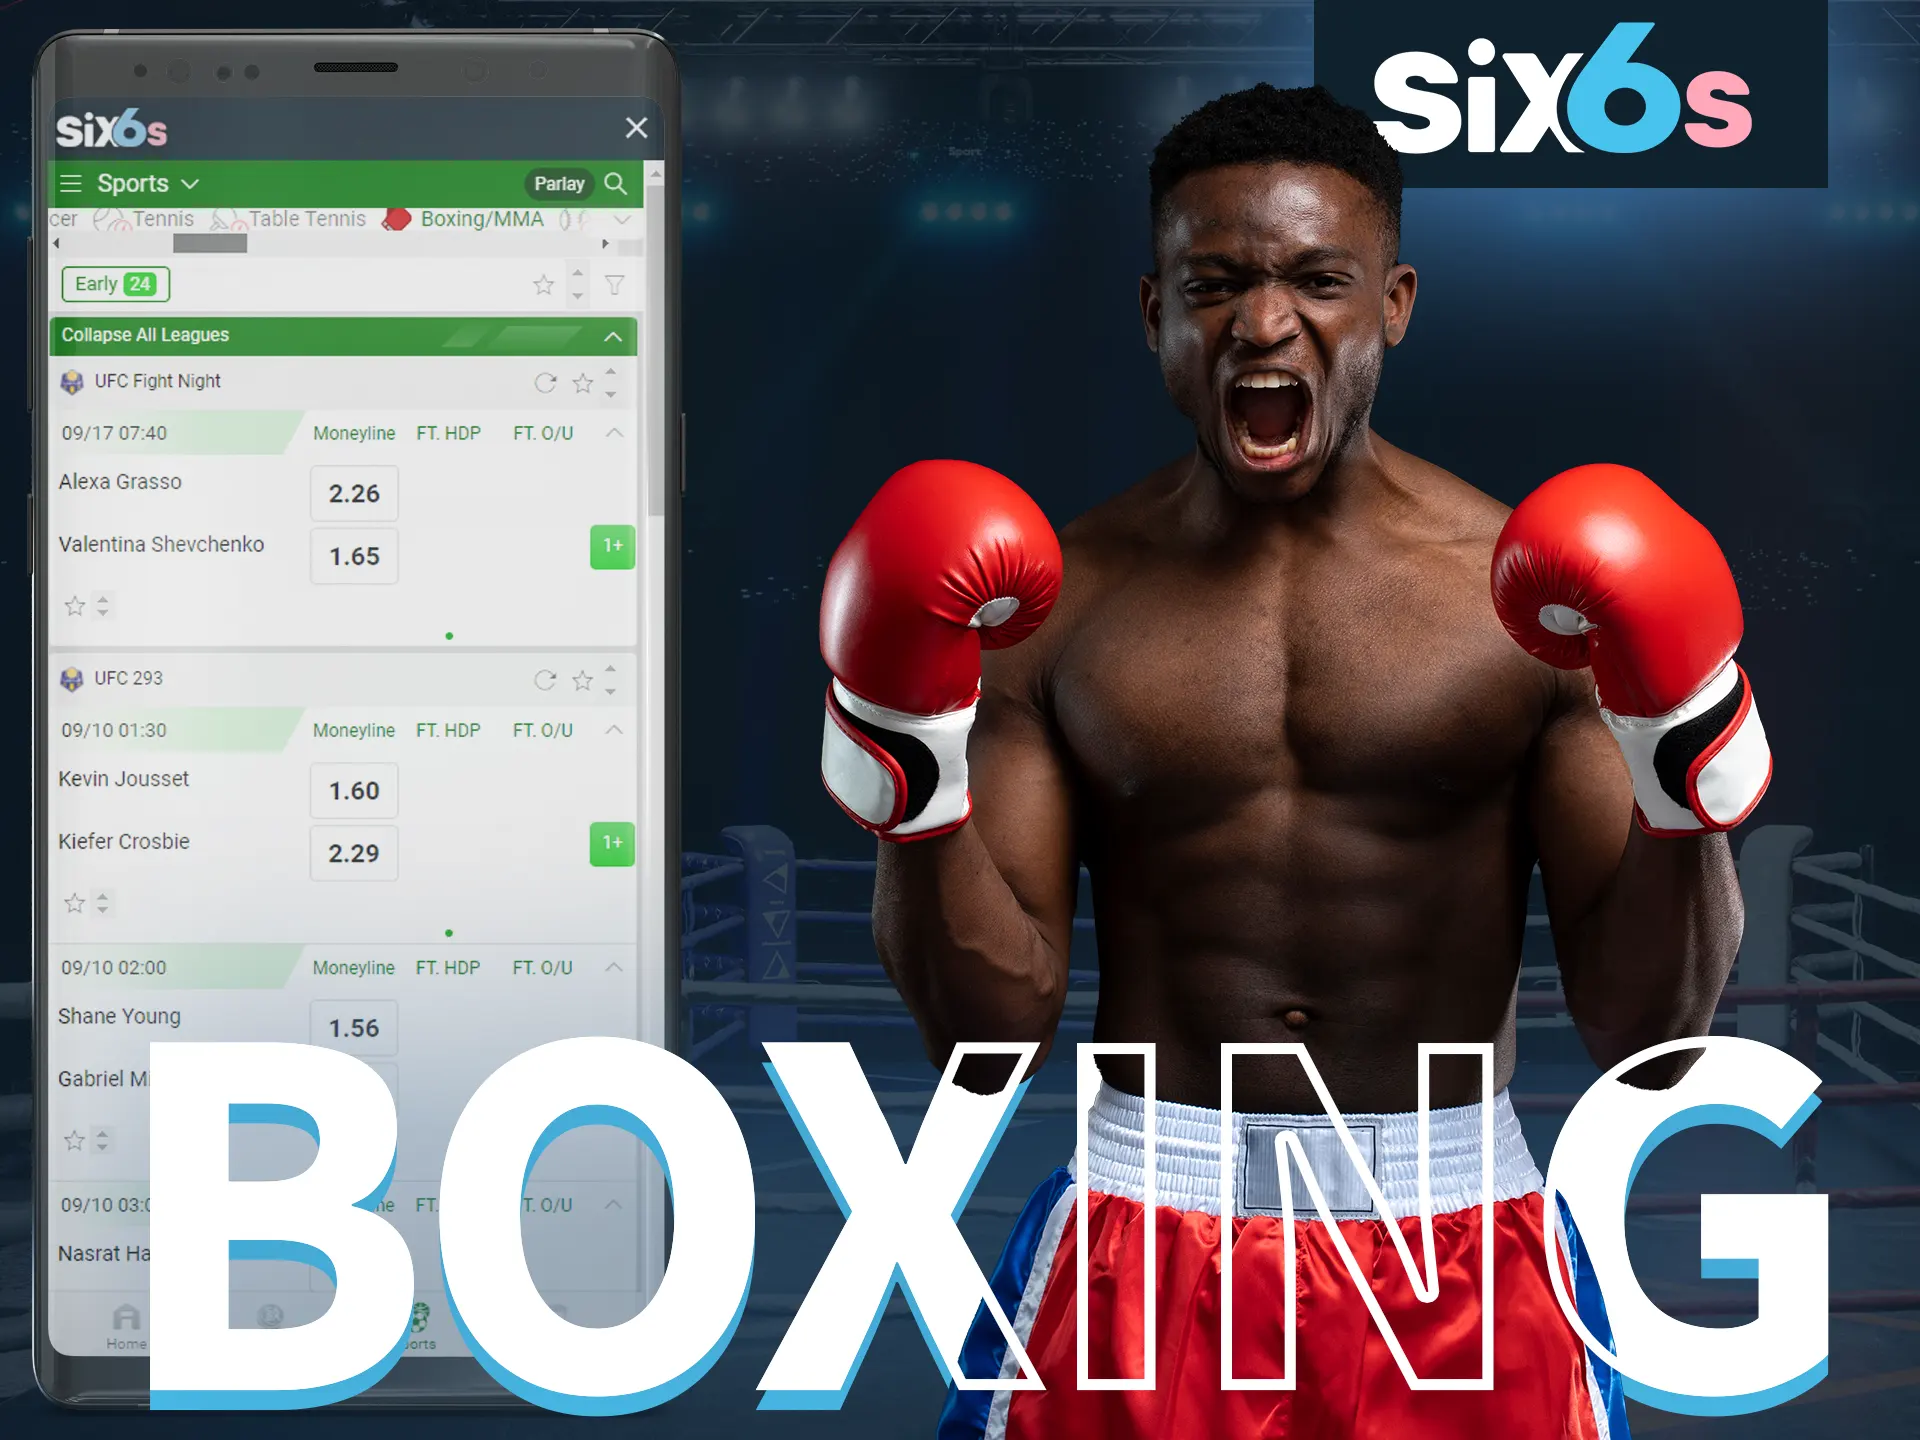 Place your bets on boxing with Six6s.